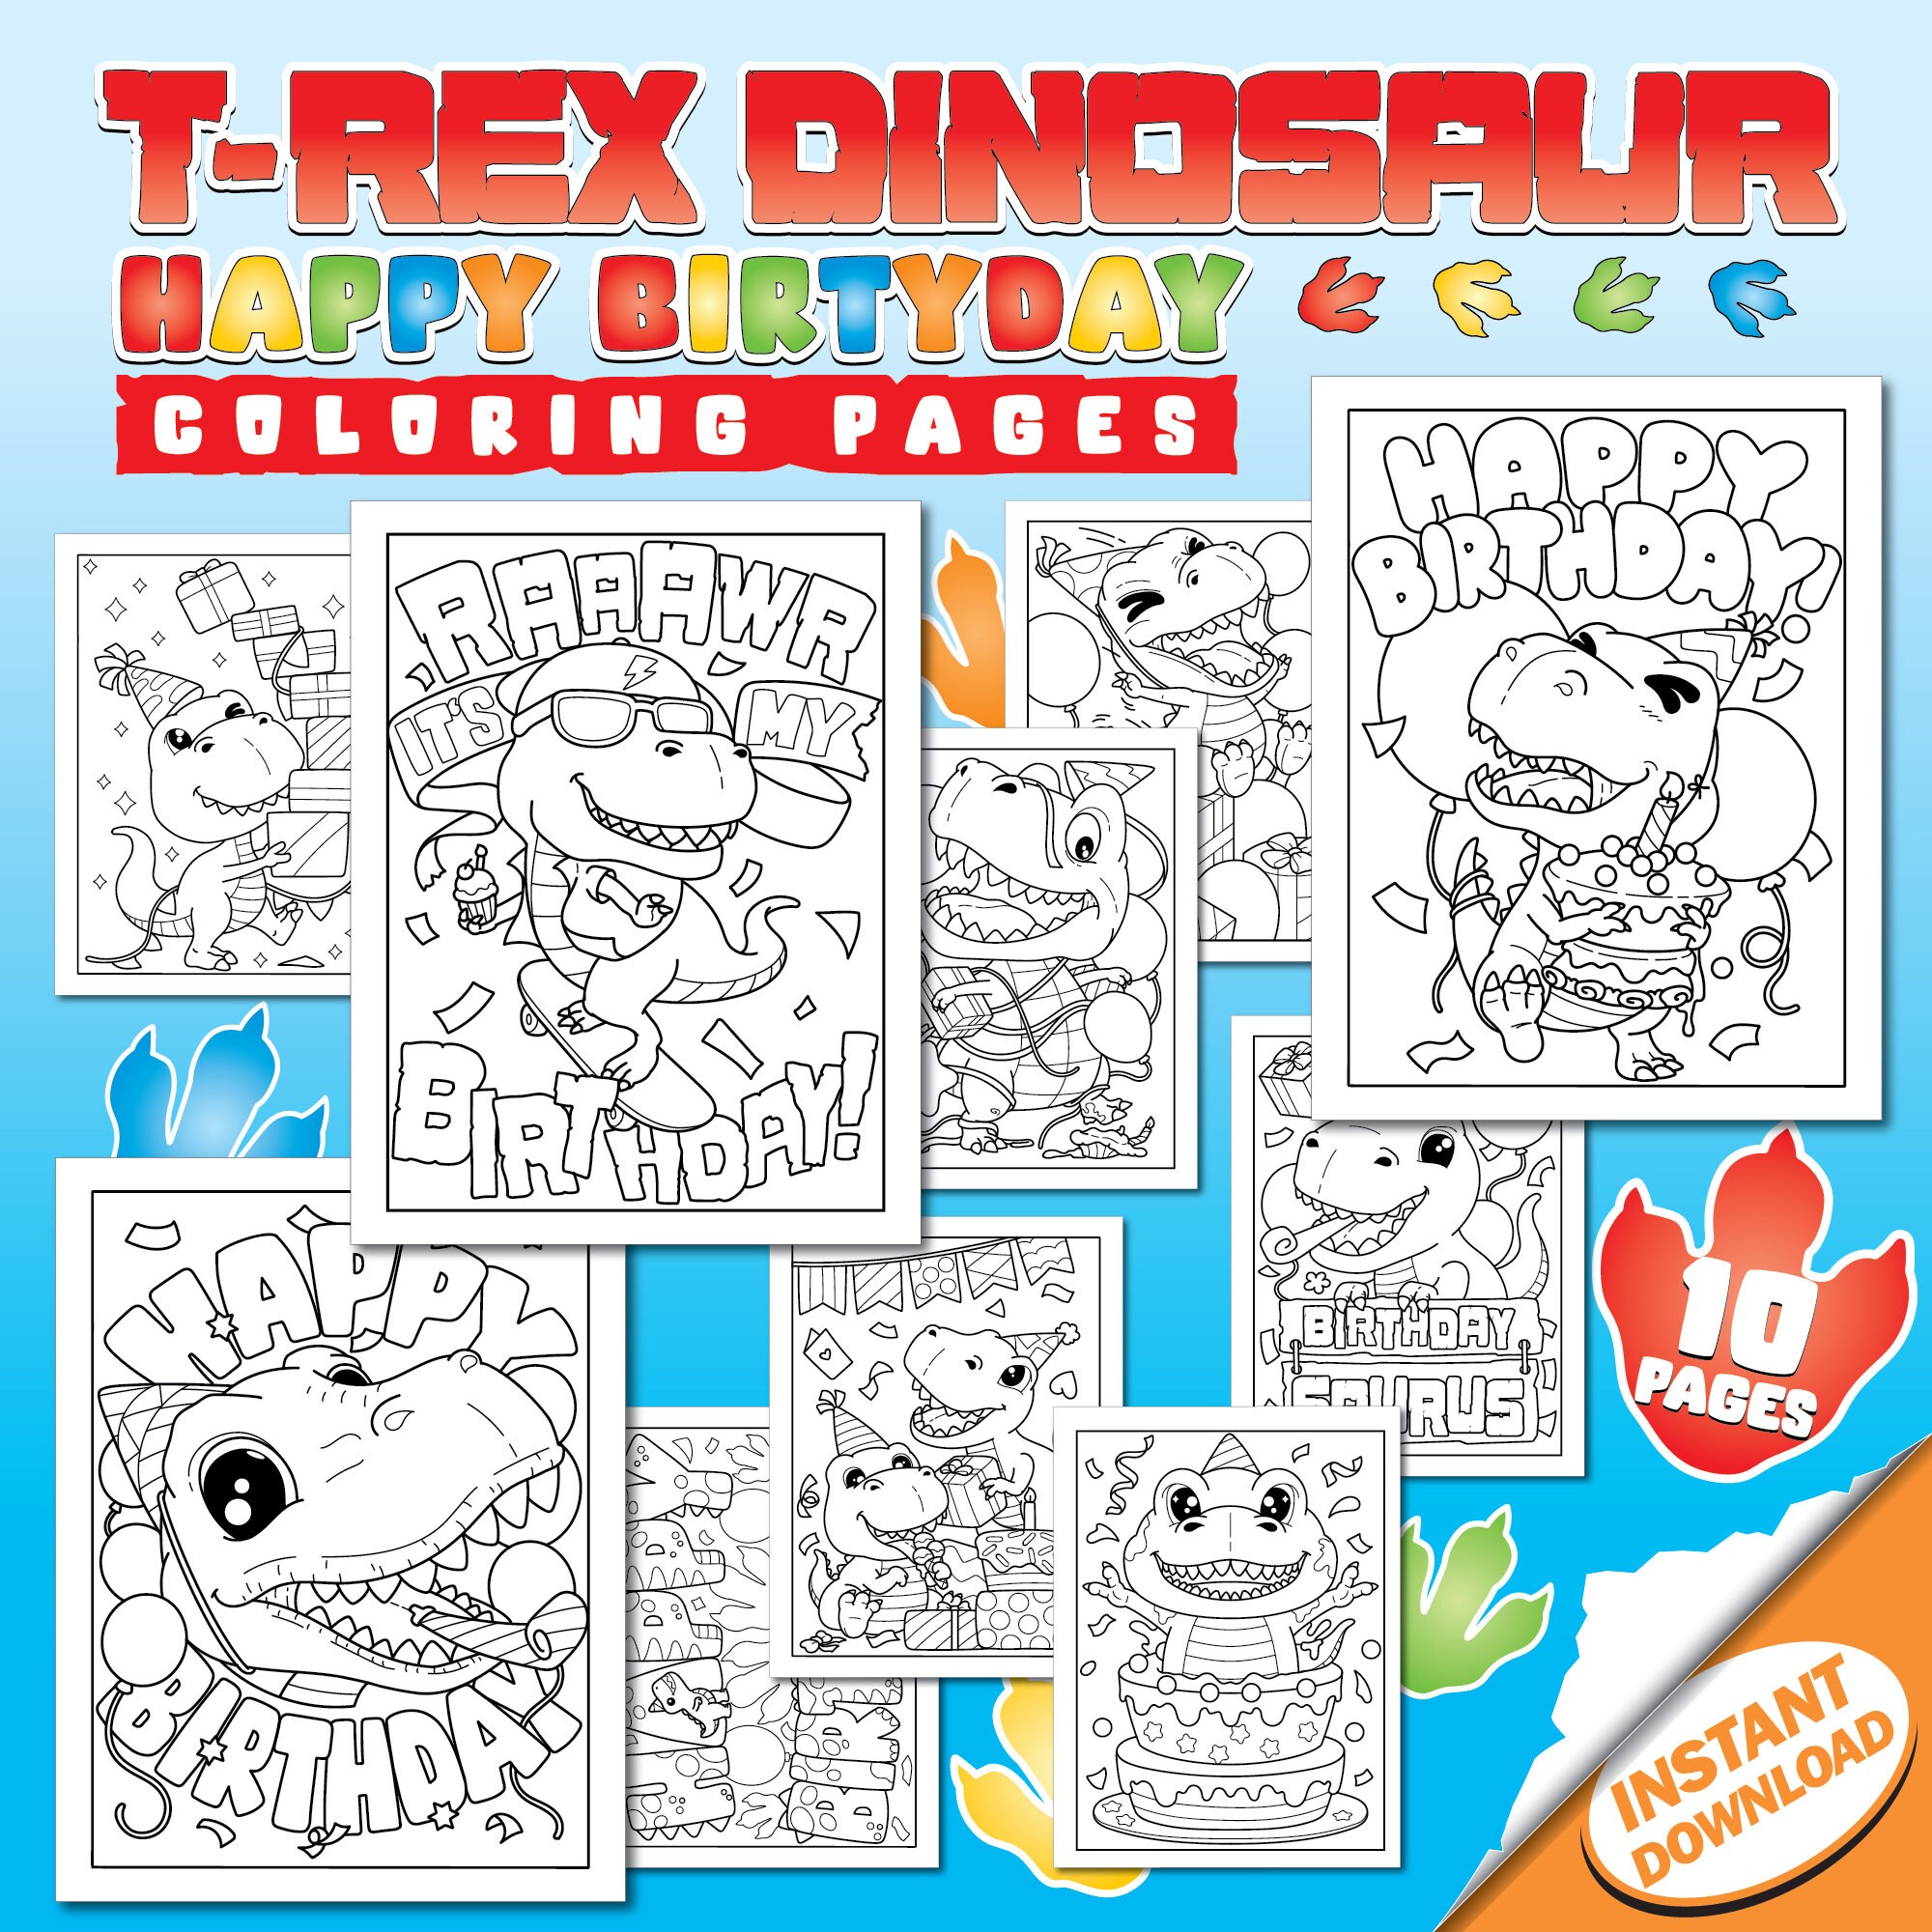 Happy Birthday T-rex Dinosaur Coloring Pages Boys Celebration Party, Rawtastic Printable Instant Digital Download PDF Sheets Illustrations